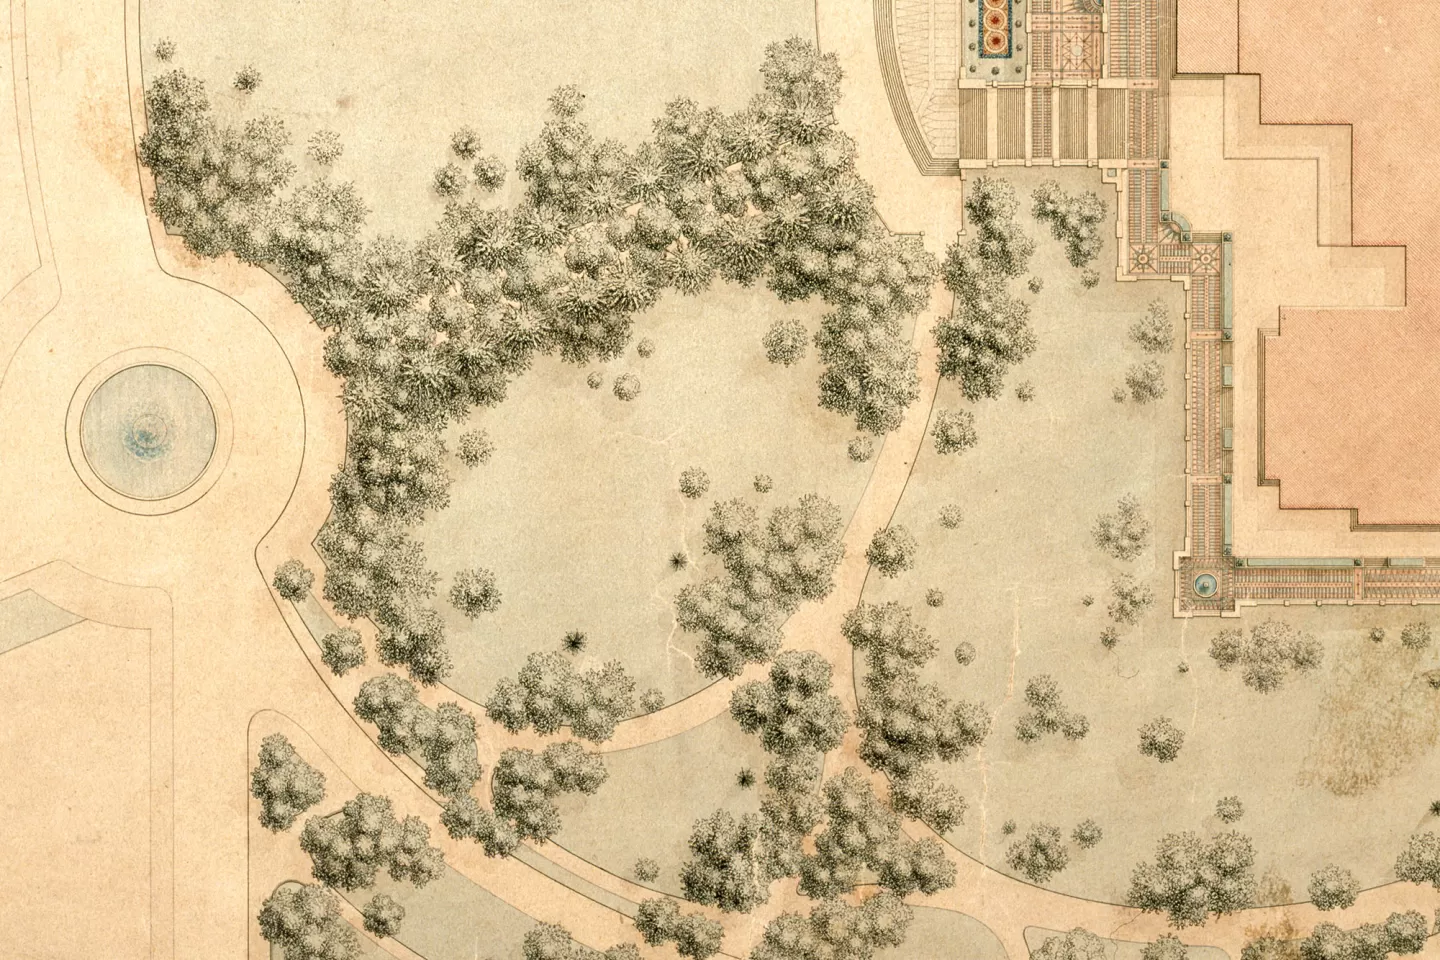 Olmsted's plan for Capitol Square, S.W.